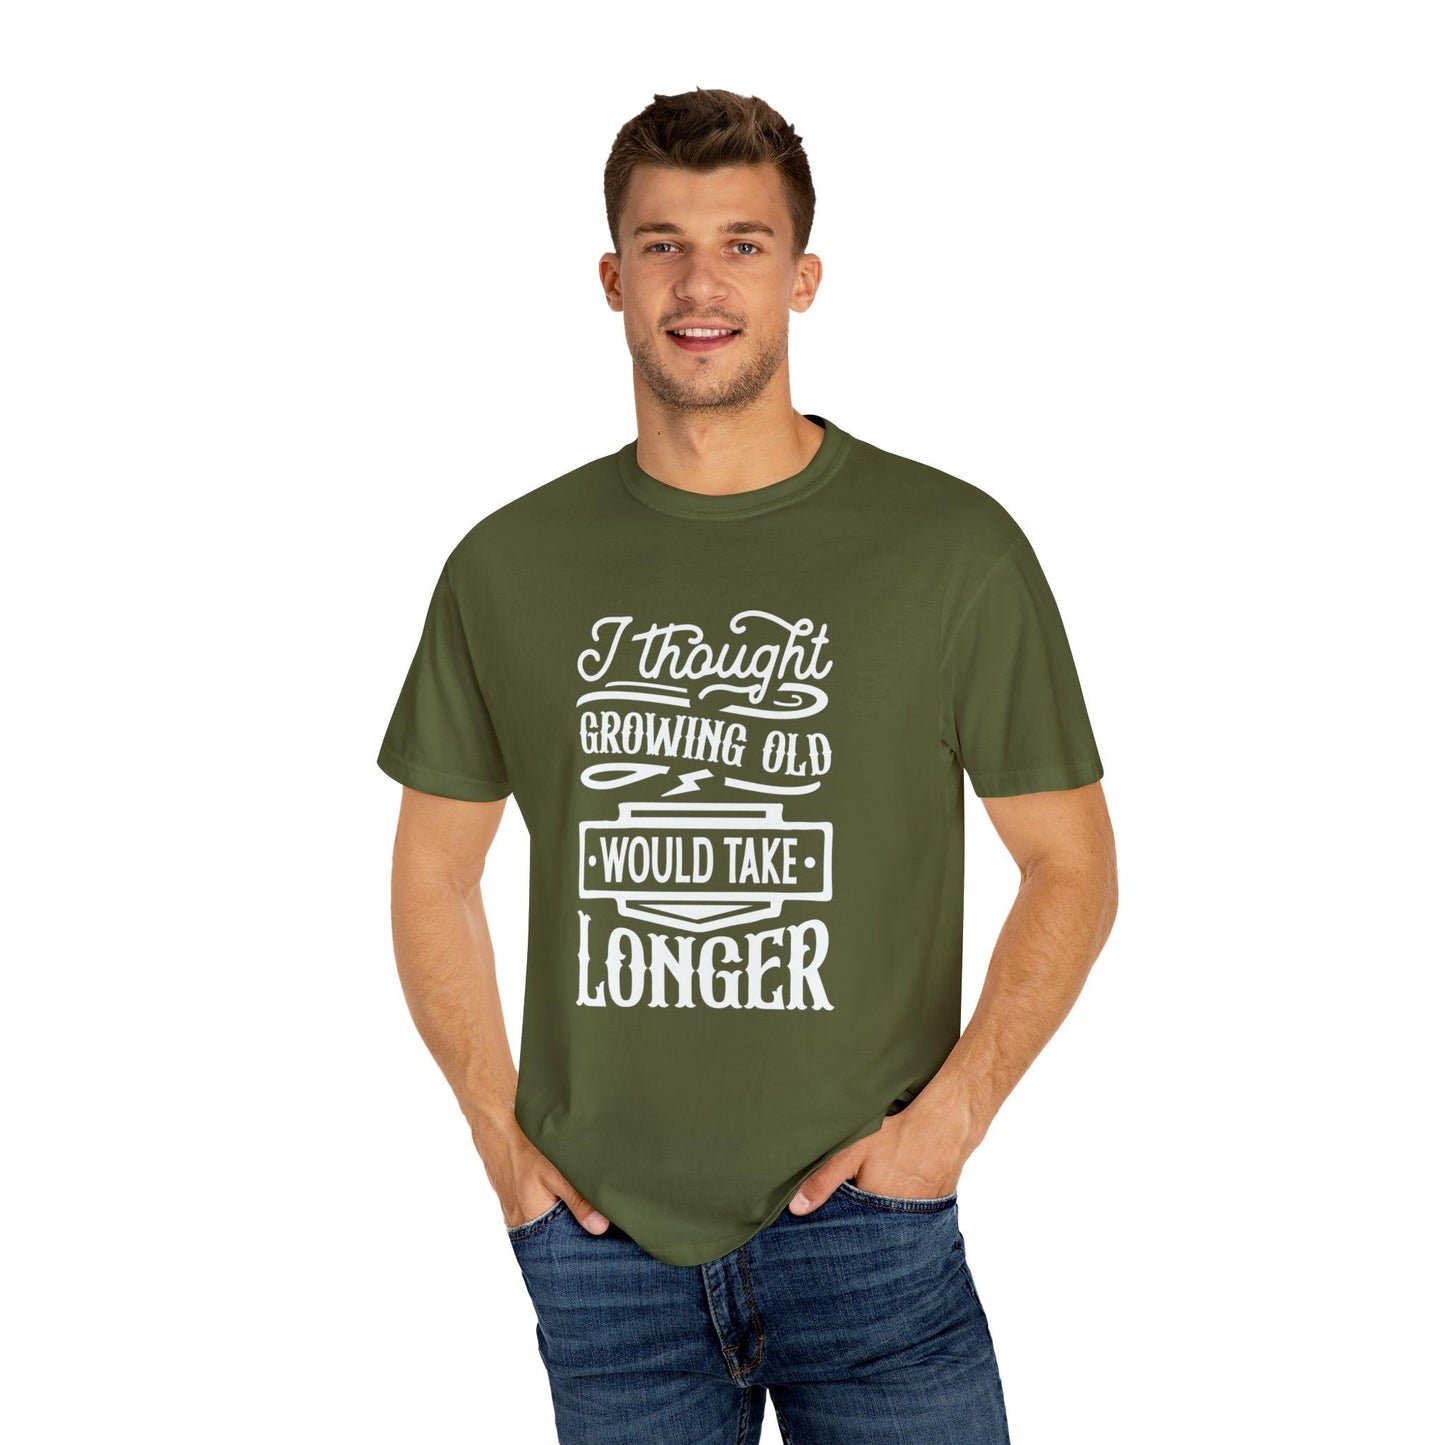 "I Thought Growing Old Would Take Longer" - Playful Quip T-Shirt for Ageless Souls - Pandaize